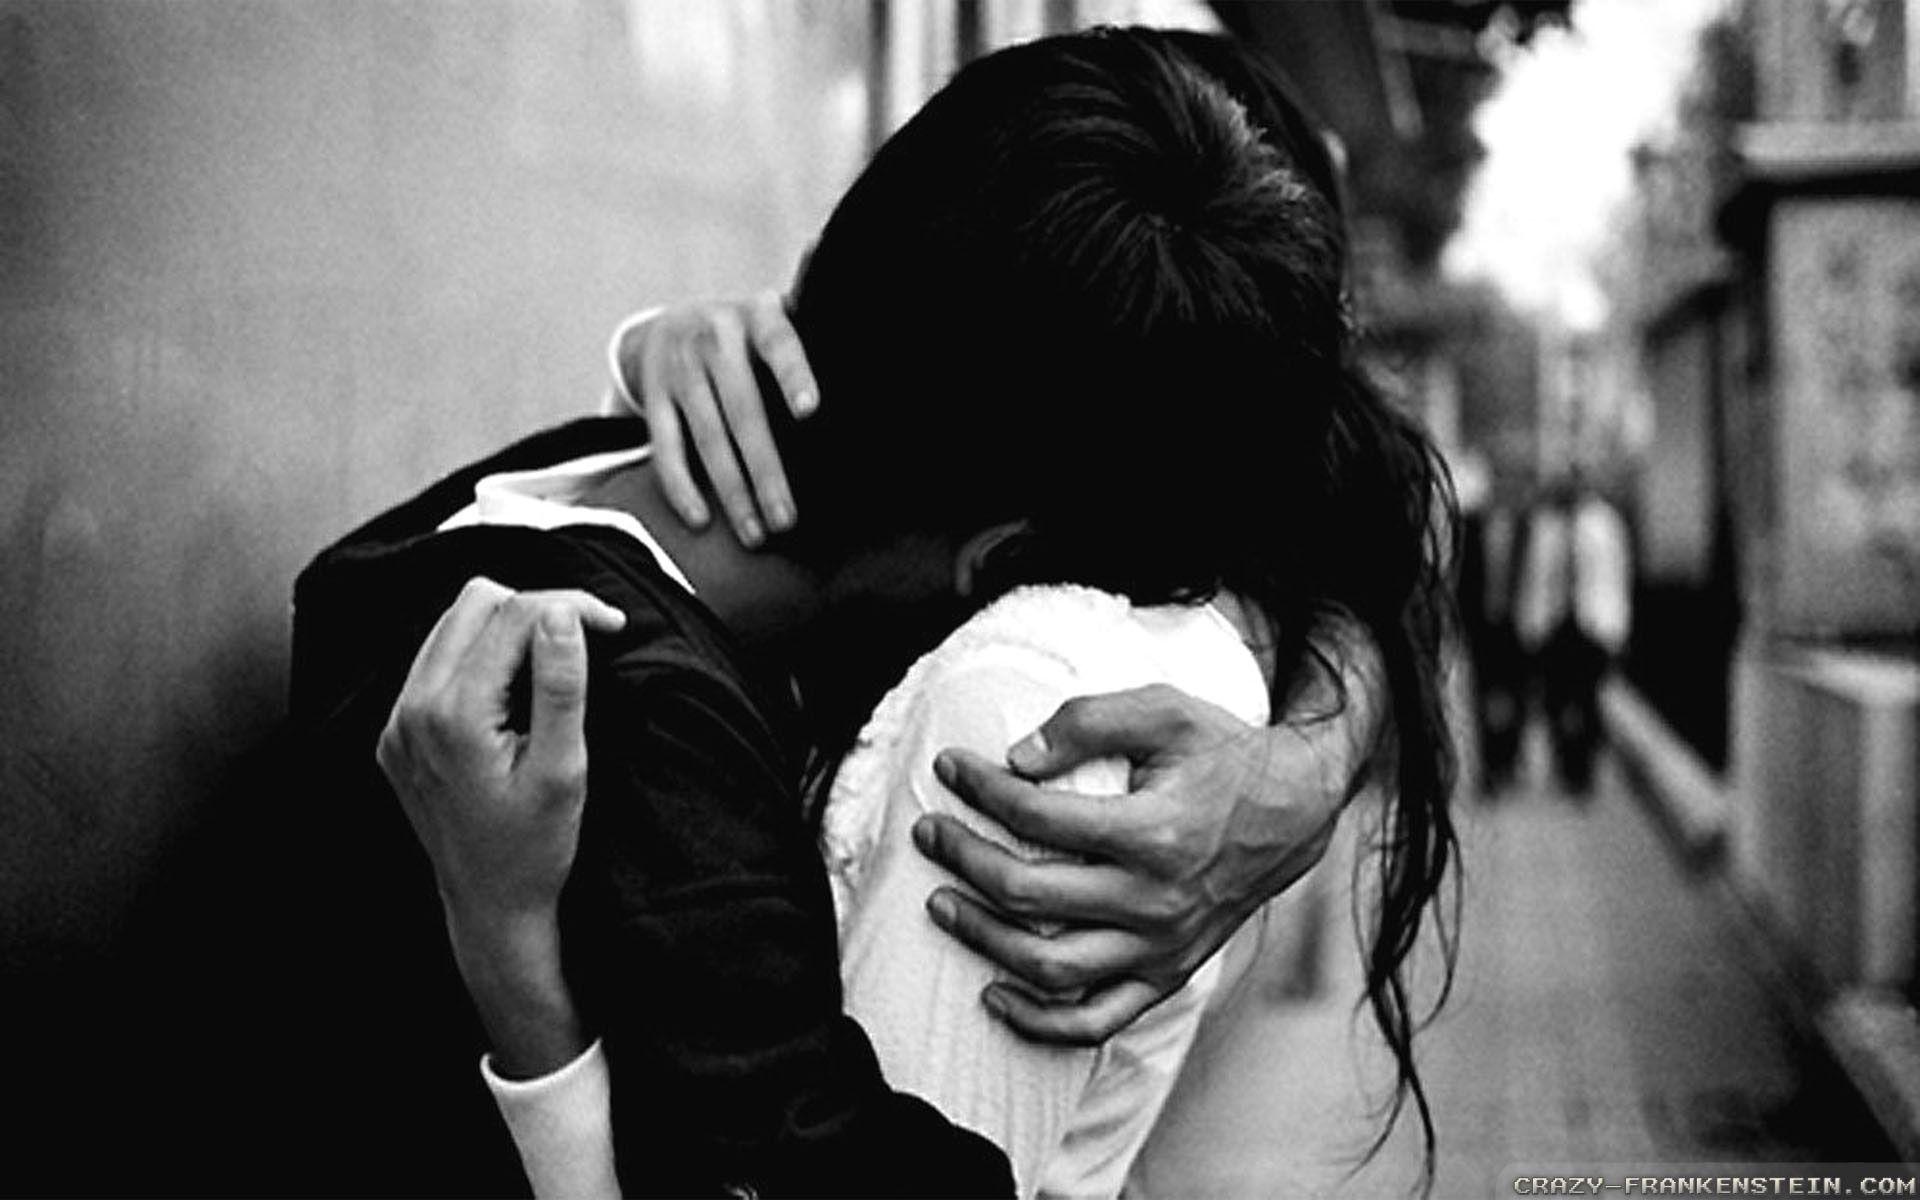 Sweet Black and White Romance Wallpaper of Love Couples. Hugging couple, Cute couples hugging, Romantic hug